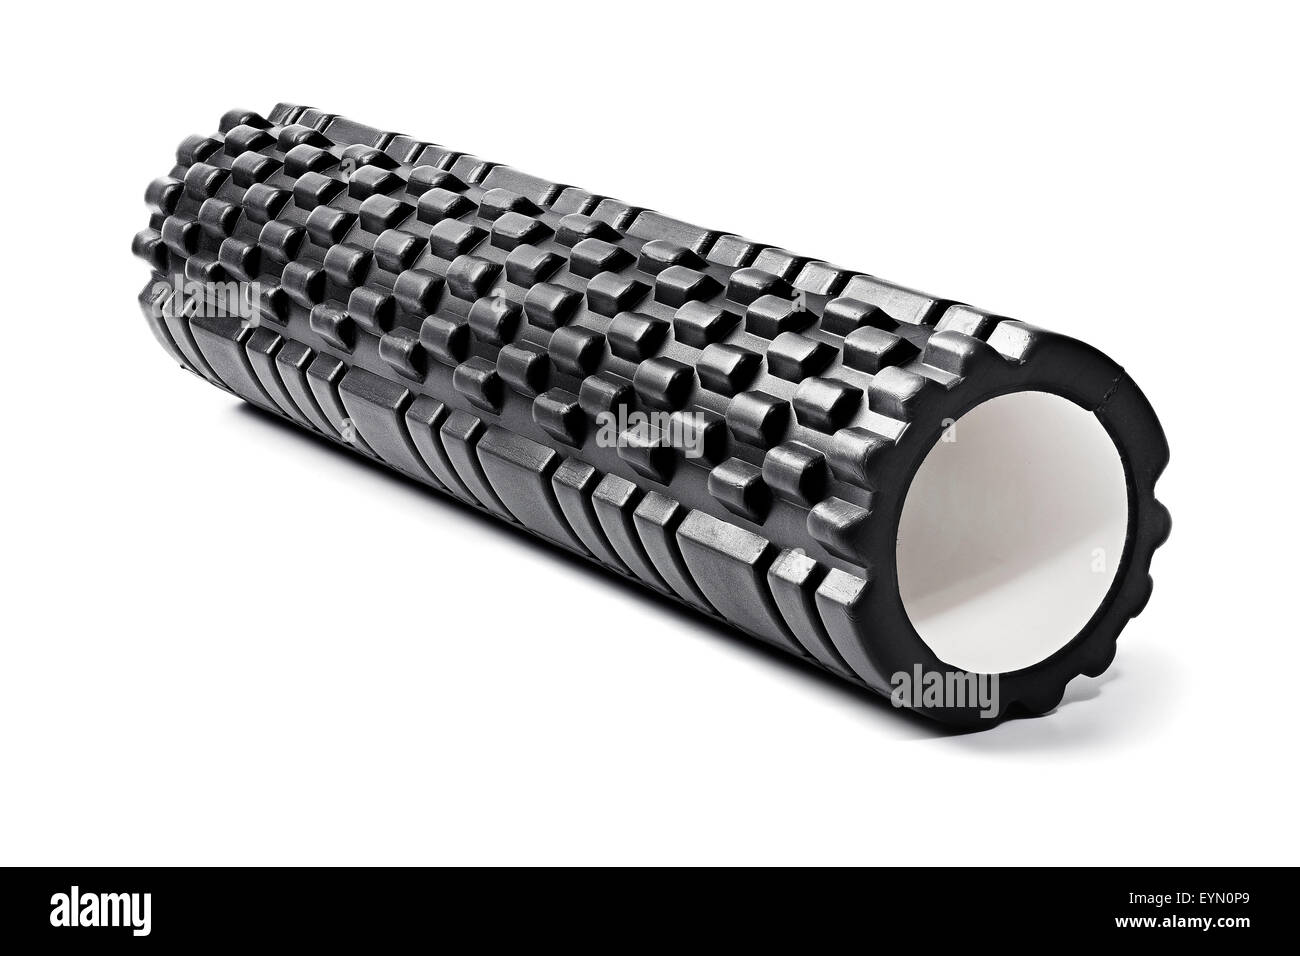 A black bumpy foam massage roller. Foam rolling is a self-myofascial release technique that is used by athletes and physical the Stock Photo